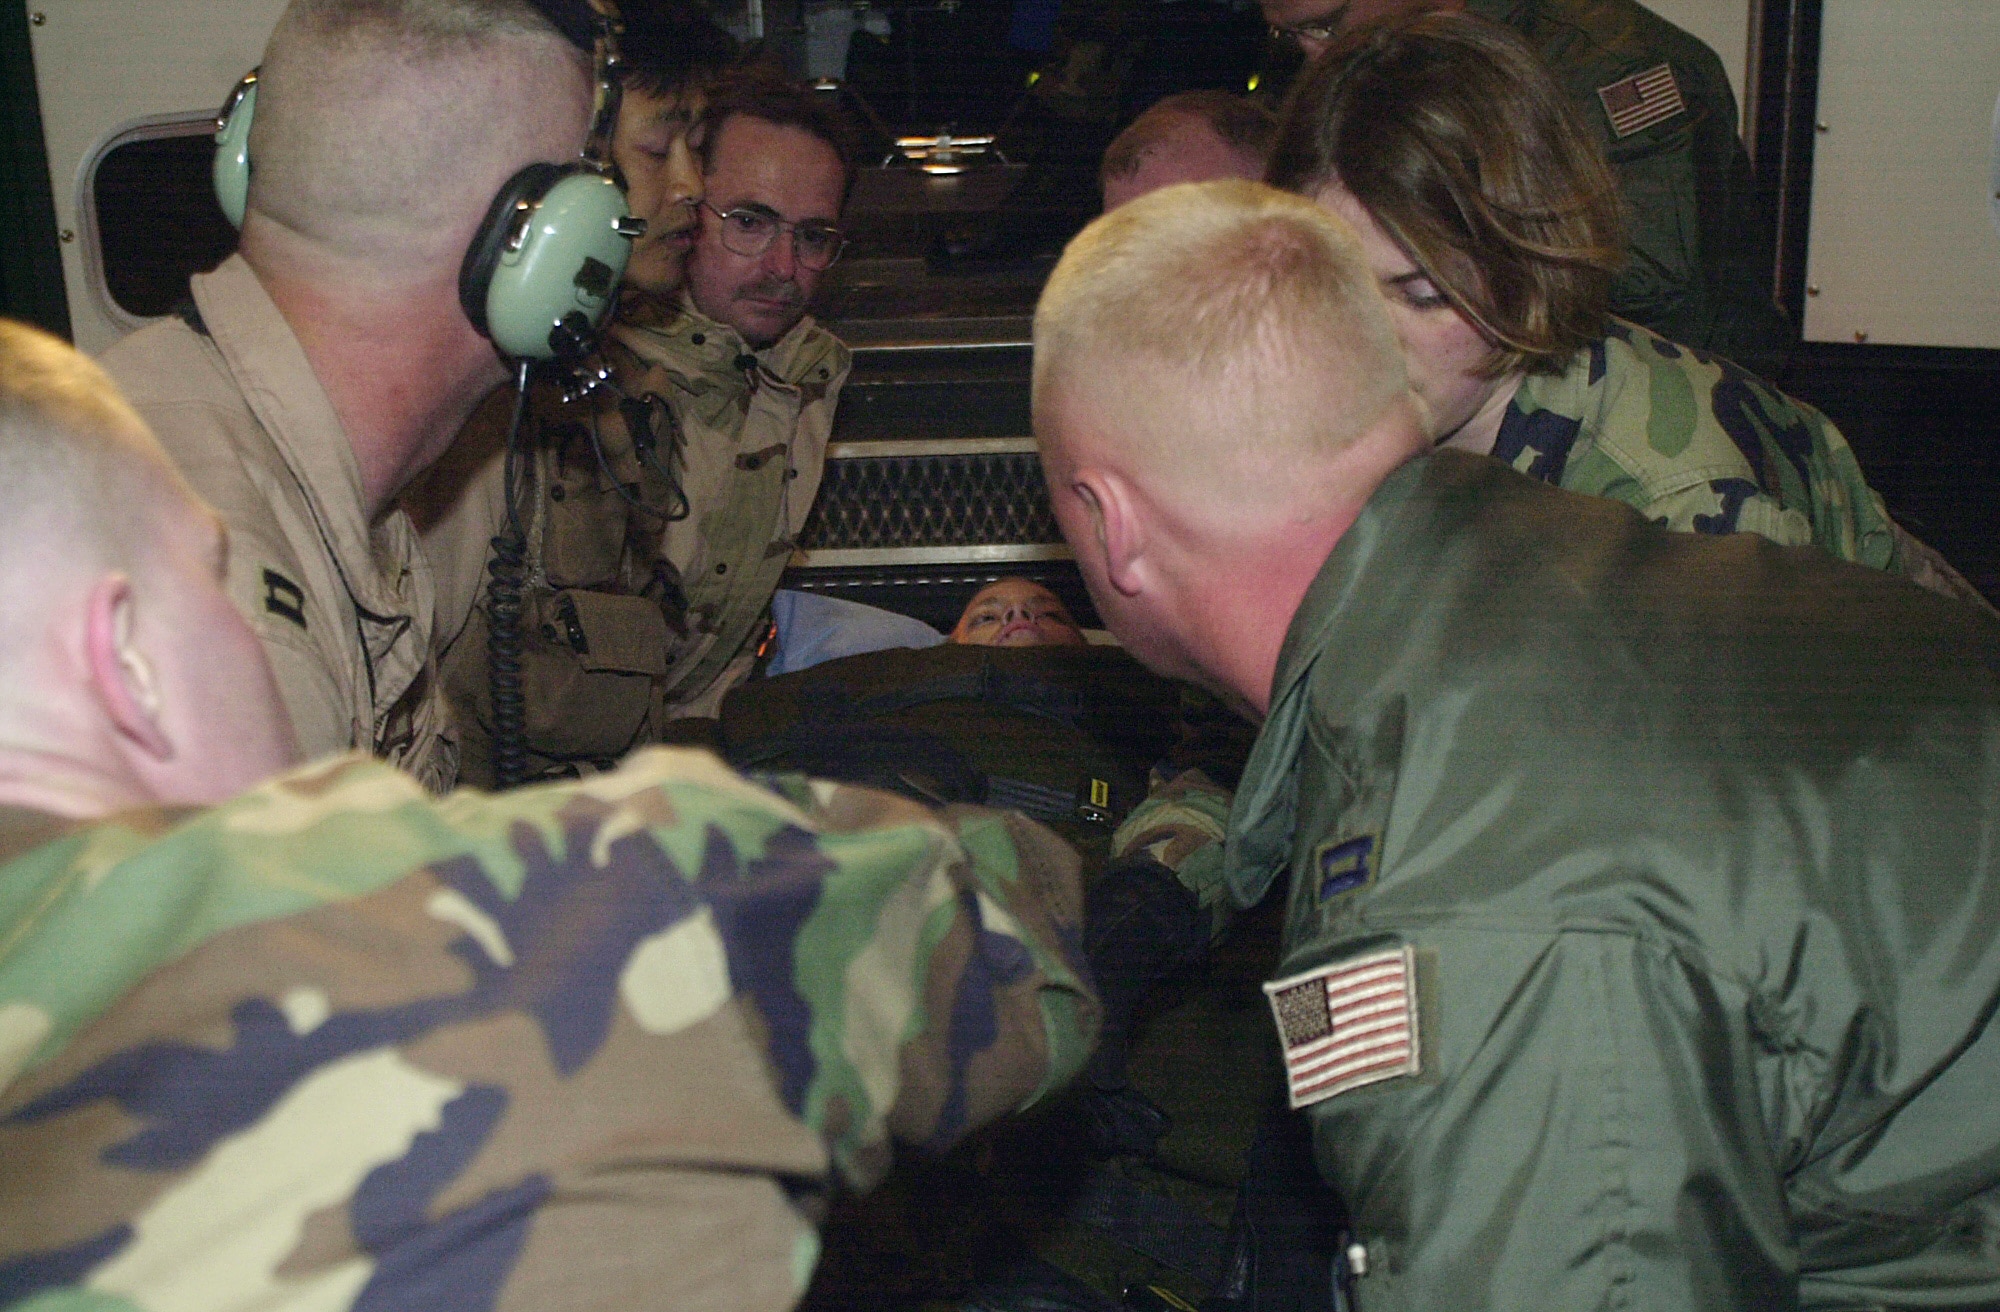 RAMSTEIN AIR BASE, Germany -- Army Pfc. Jessica Lynch is placed into an ambulance after arriving here early April 3.  Air Force pilots and combat controllers played a part in her rescue from Iraqi captors.  (U.S. Air Force photo by Staff Sgt. Felicia Haecker)